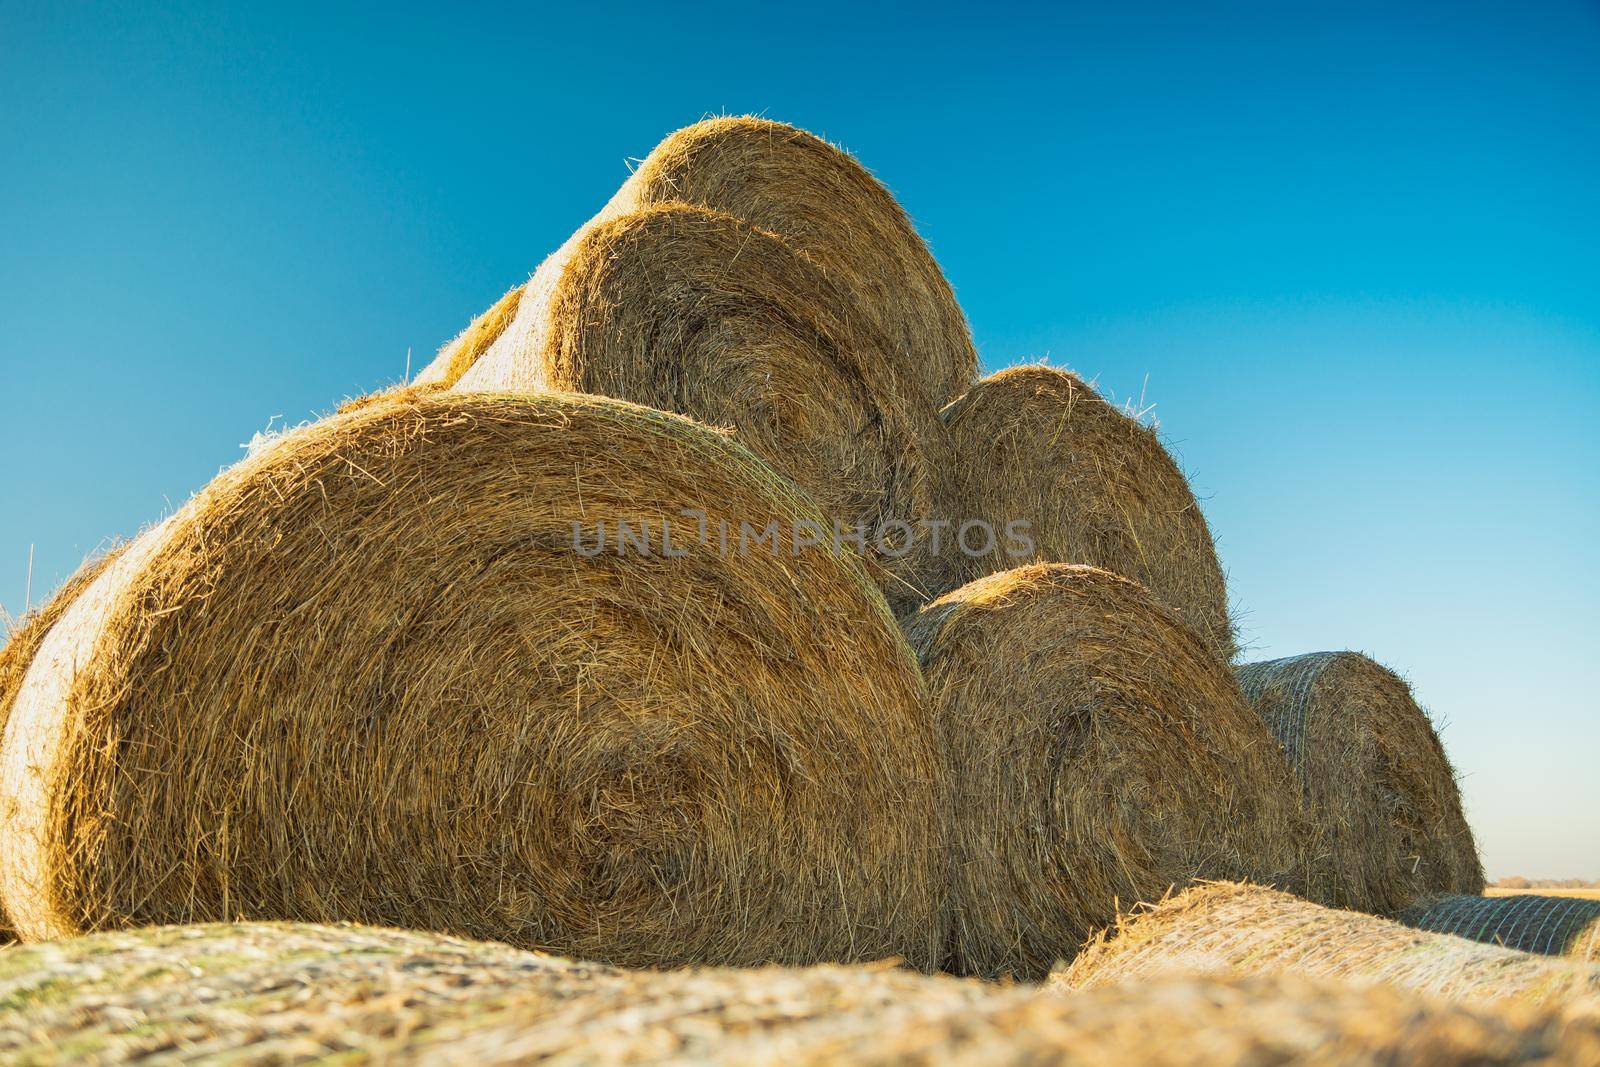 Pyramid of hay bales against the blue sky